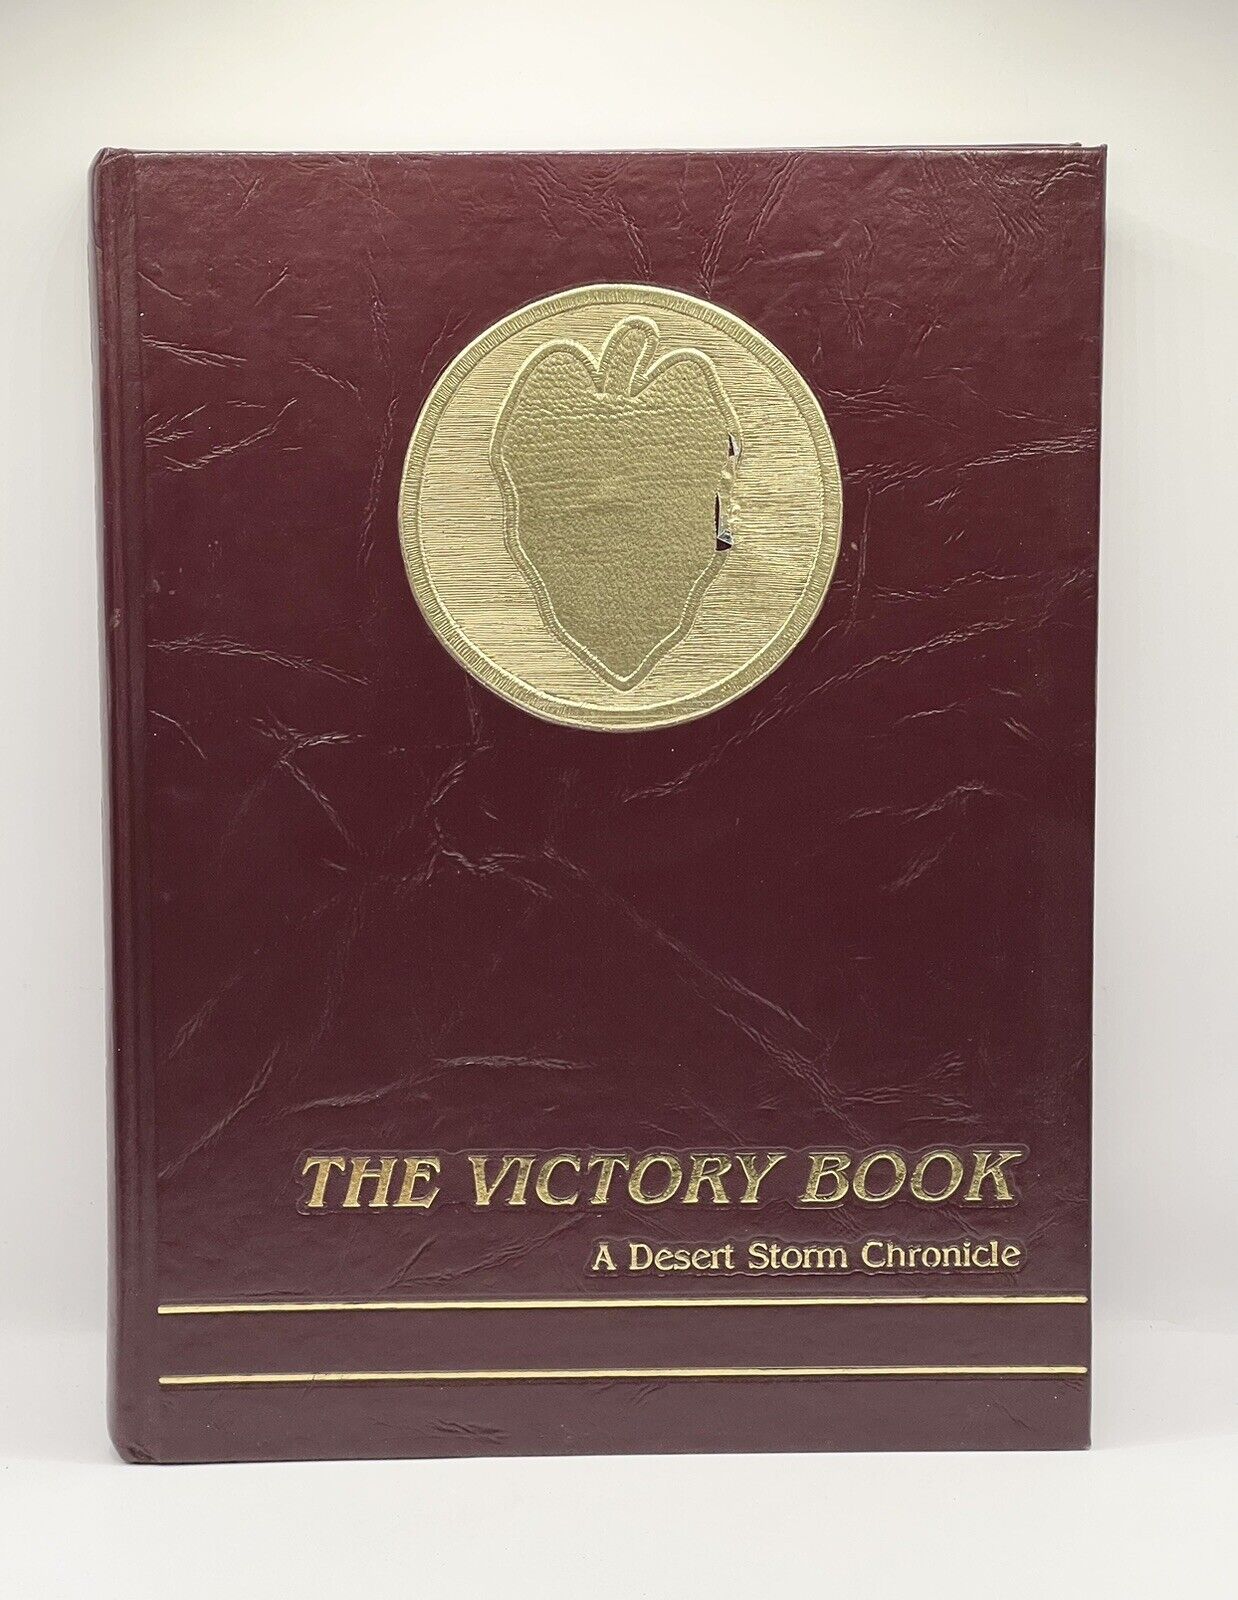 The Victory Book, A Desert Storm Chronicle, 24th Inf. Div. (Mech) 1990/91